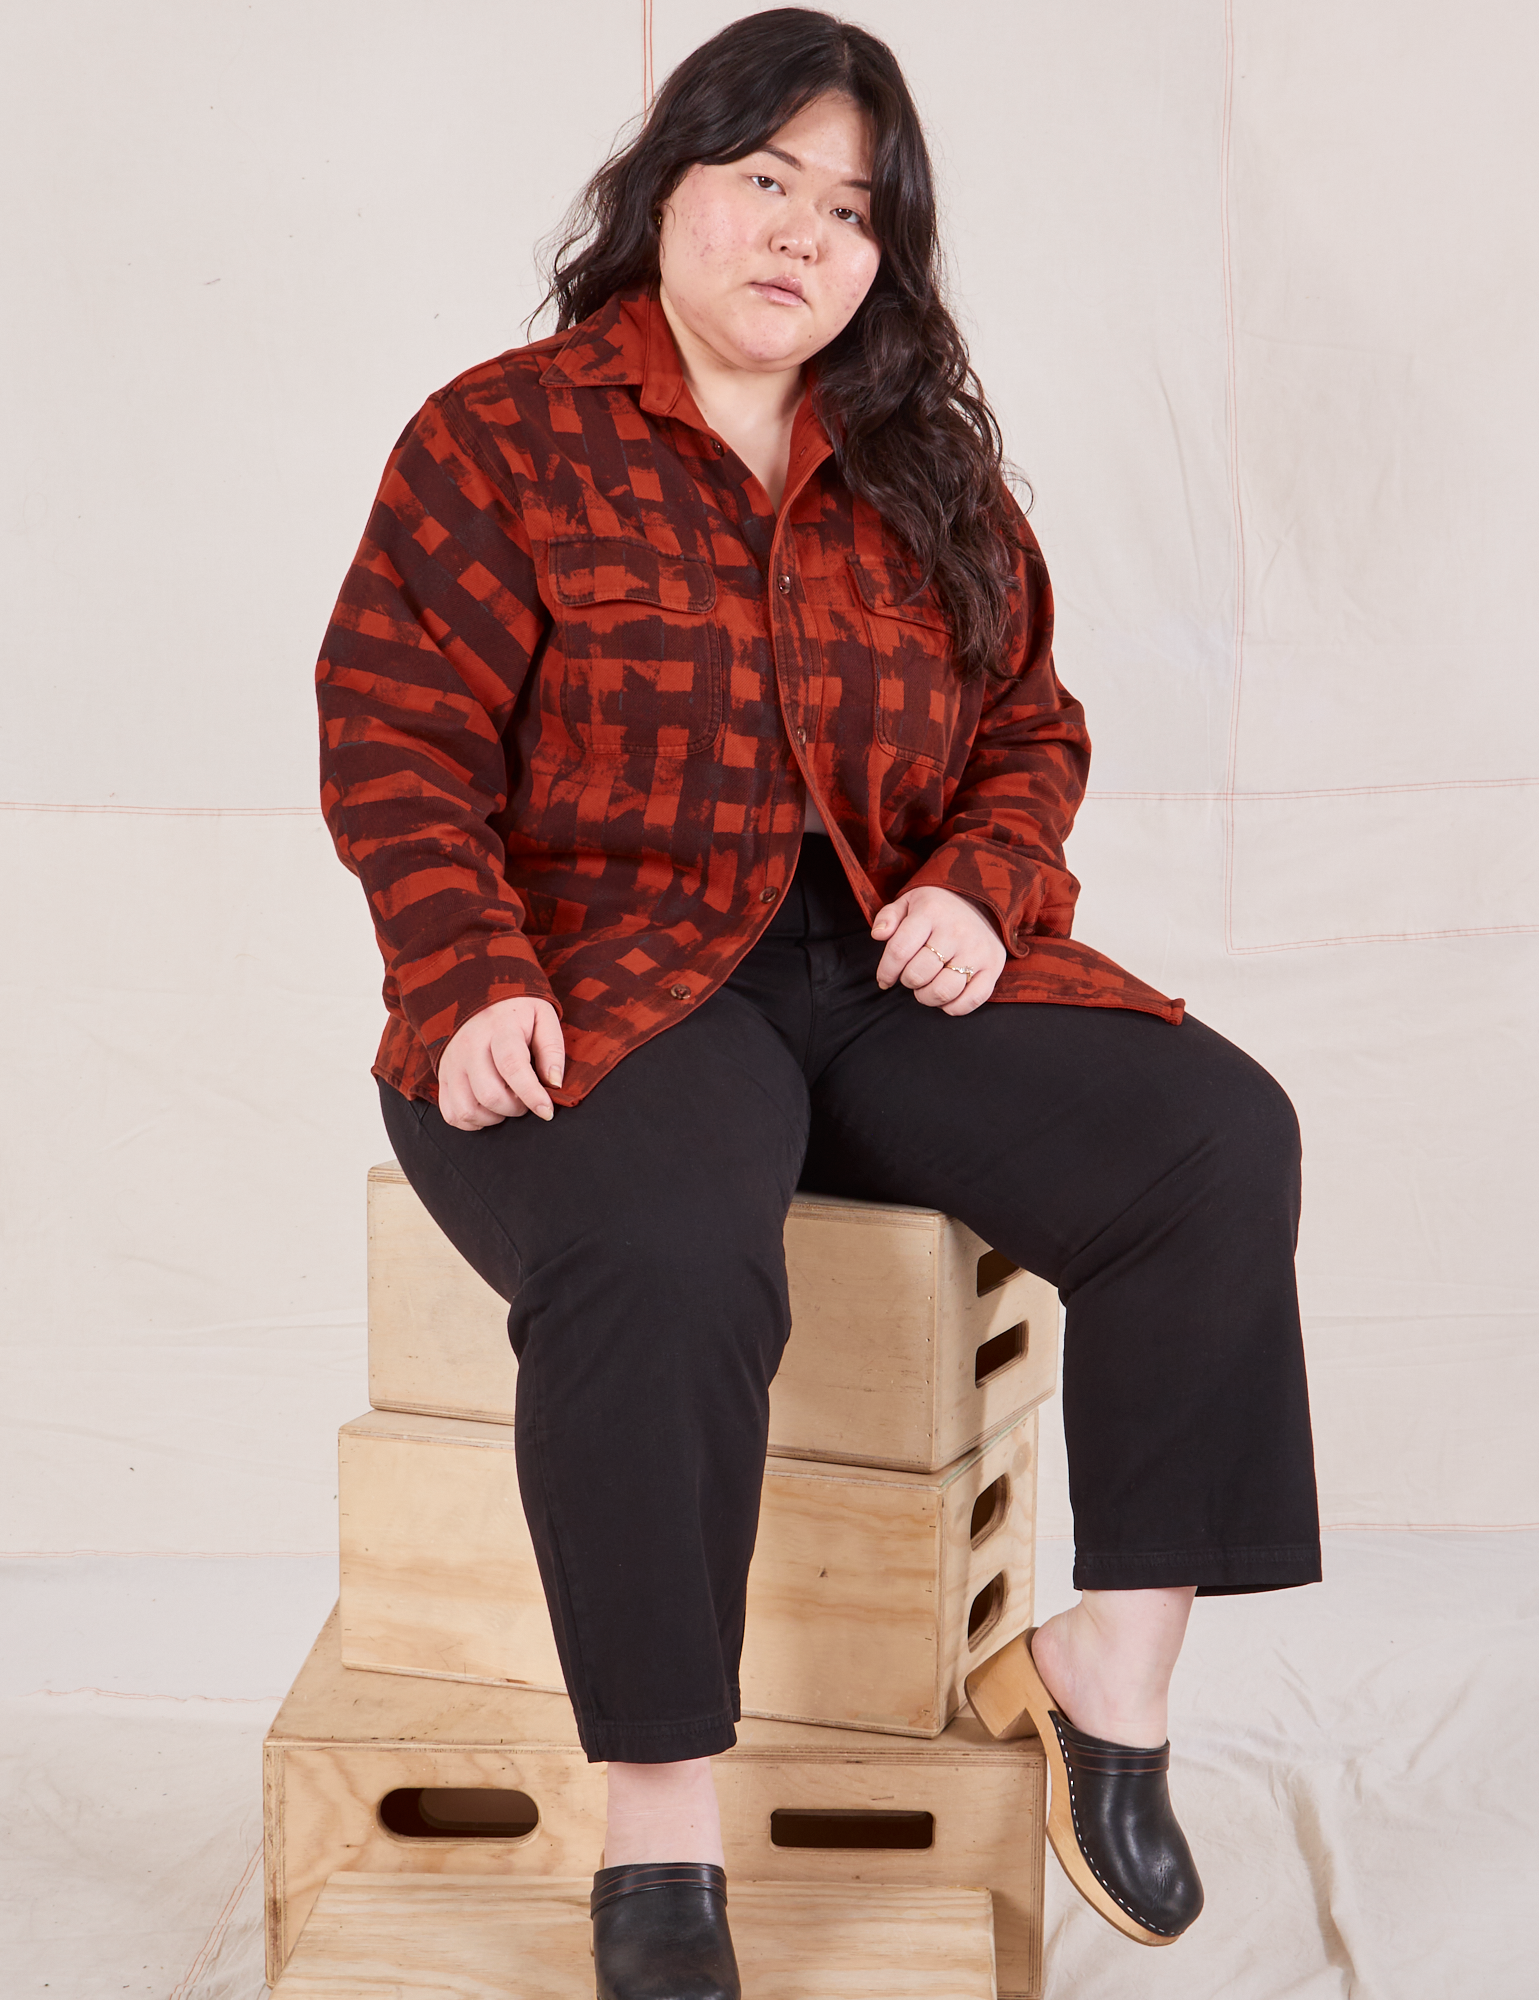 Ashley is wearing Plaid Flannel Overshirt in Paprika and black Work Pants